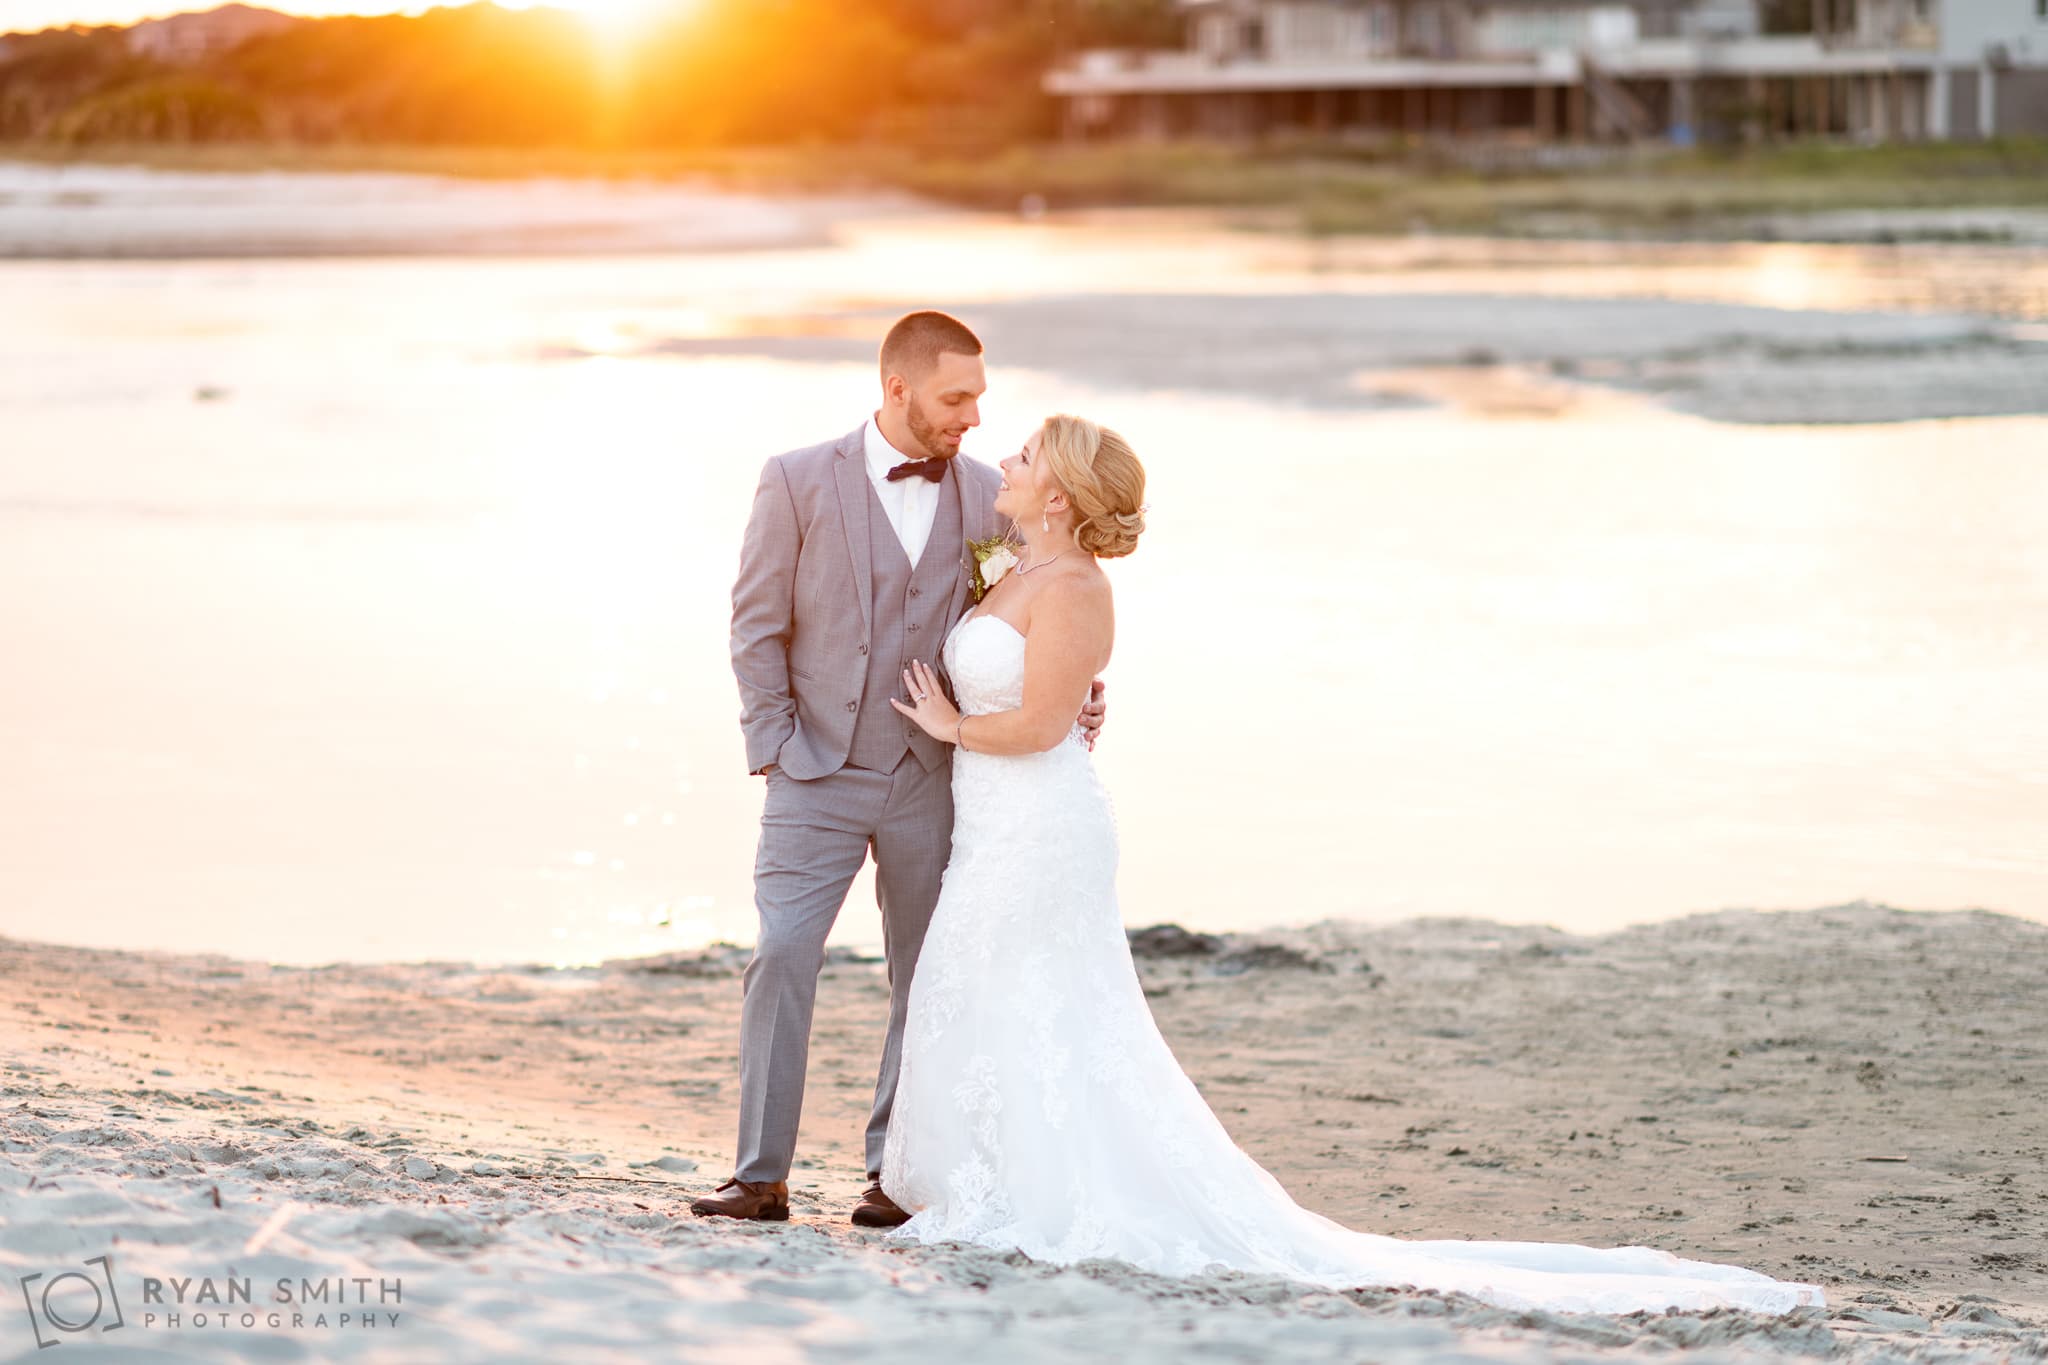 Bride and groom in front of the inlet backlit by sunset - 21 Main Events - North Myrtle Beach